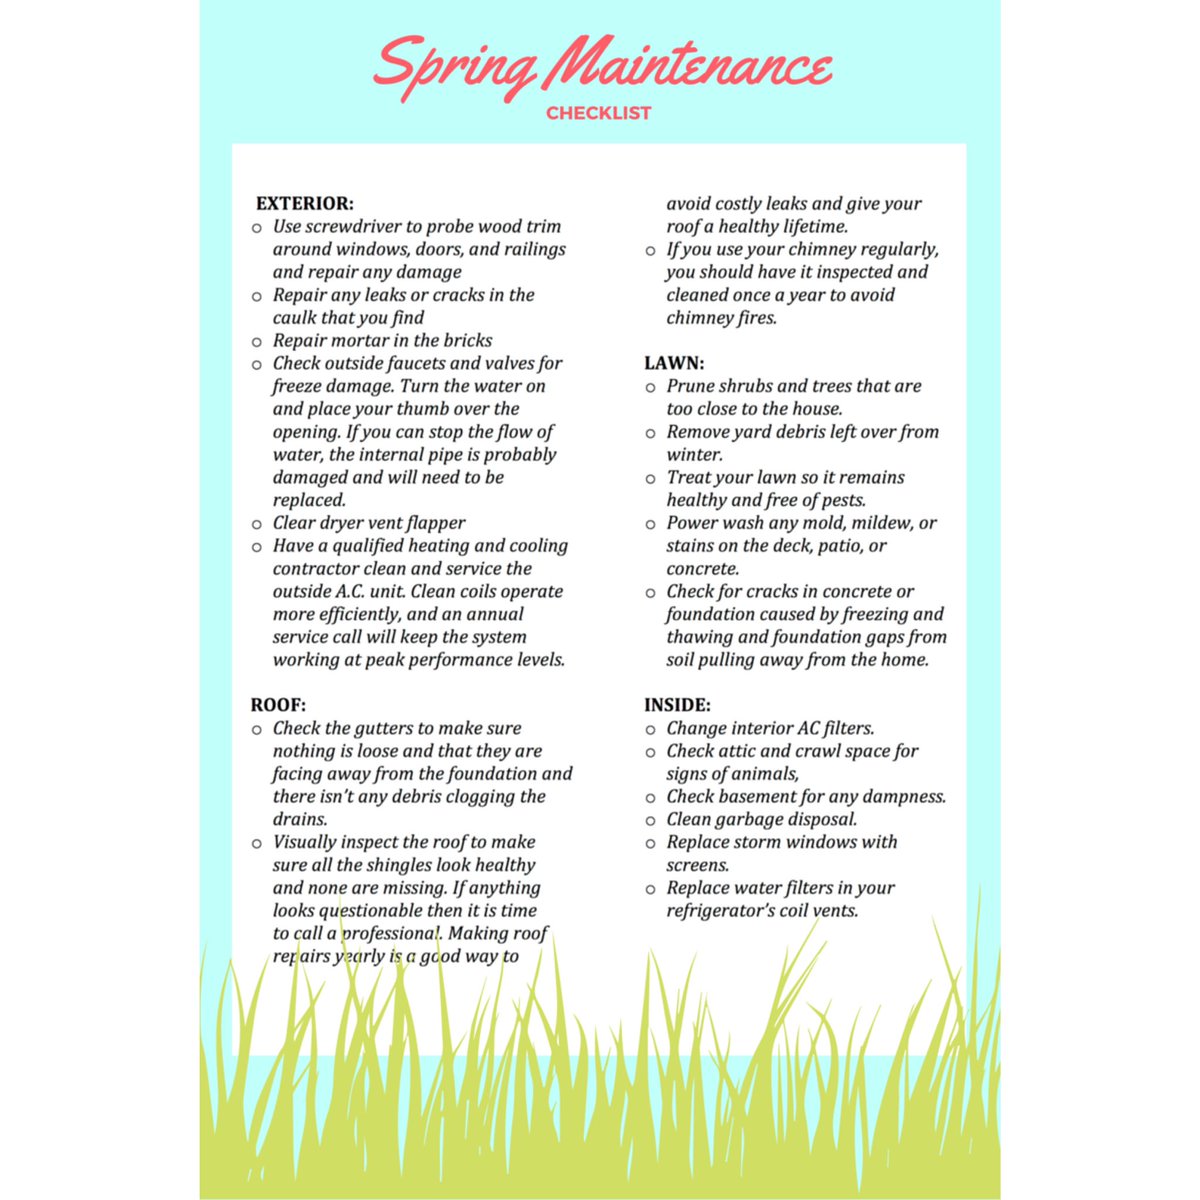 Summer is just around the corner and we want to help you get your house and yard ready. This checklist will ensure that your house is ready for you to spend your hot summer days enjoying the outdoors 🌞#springmaintenance #summer #outdoorliving